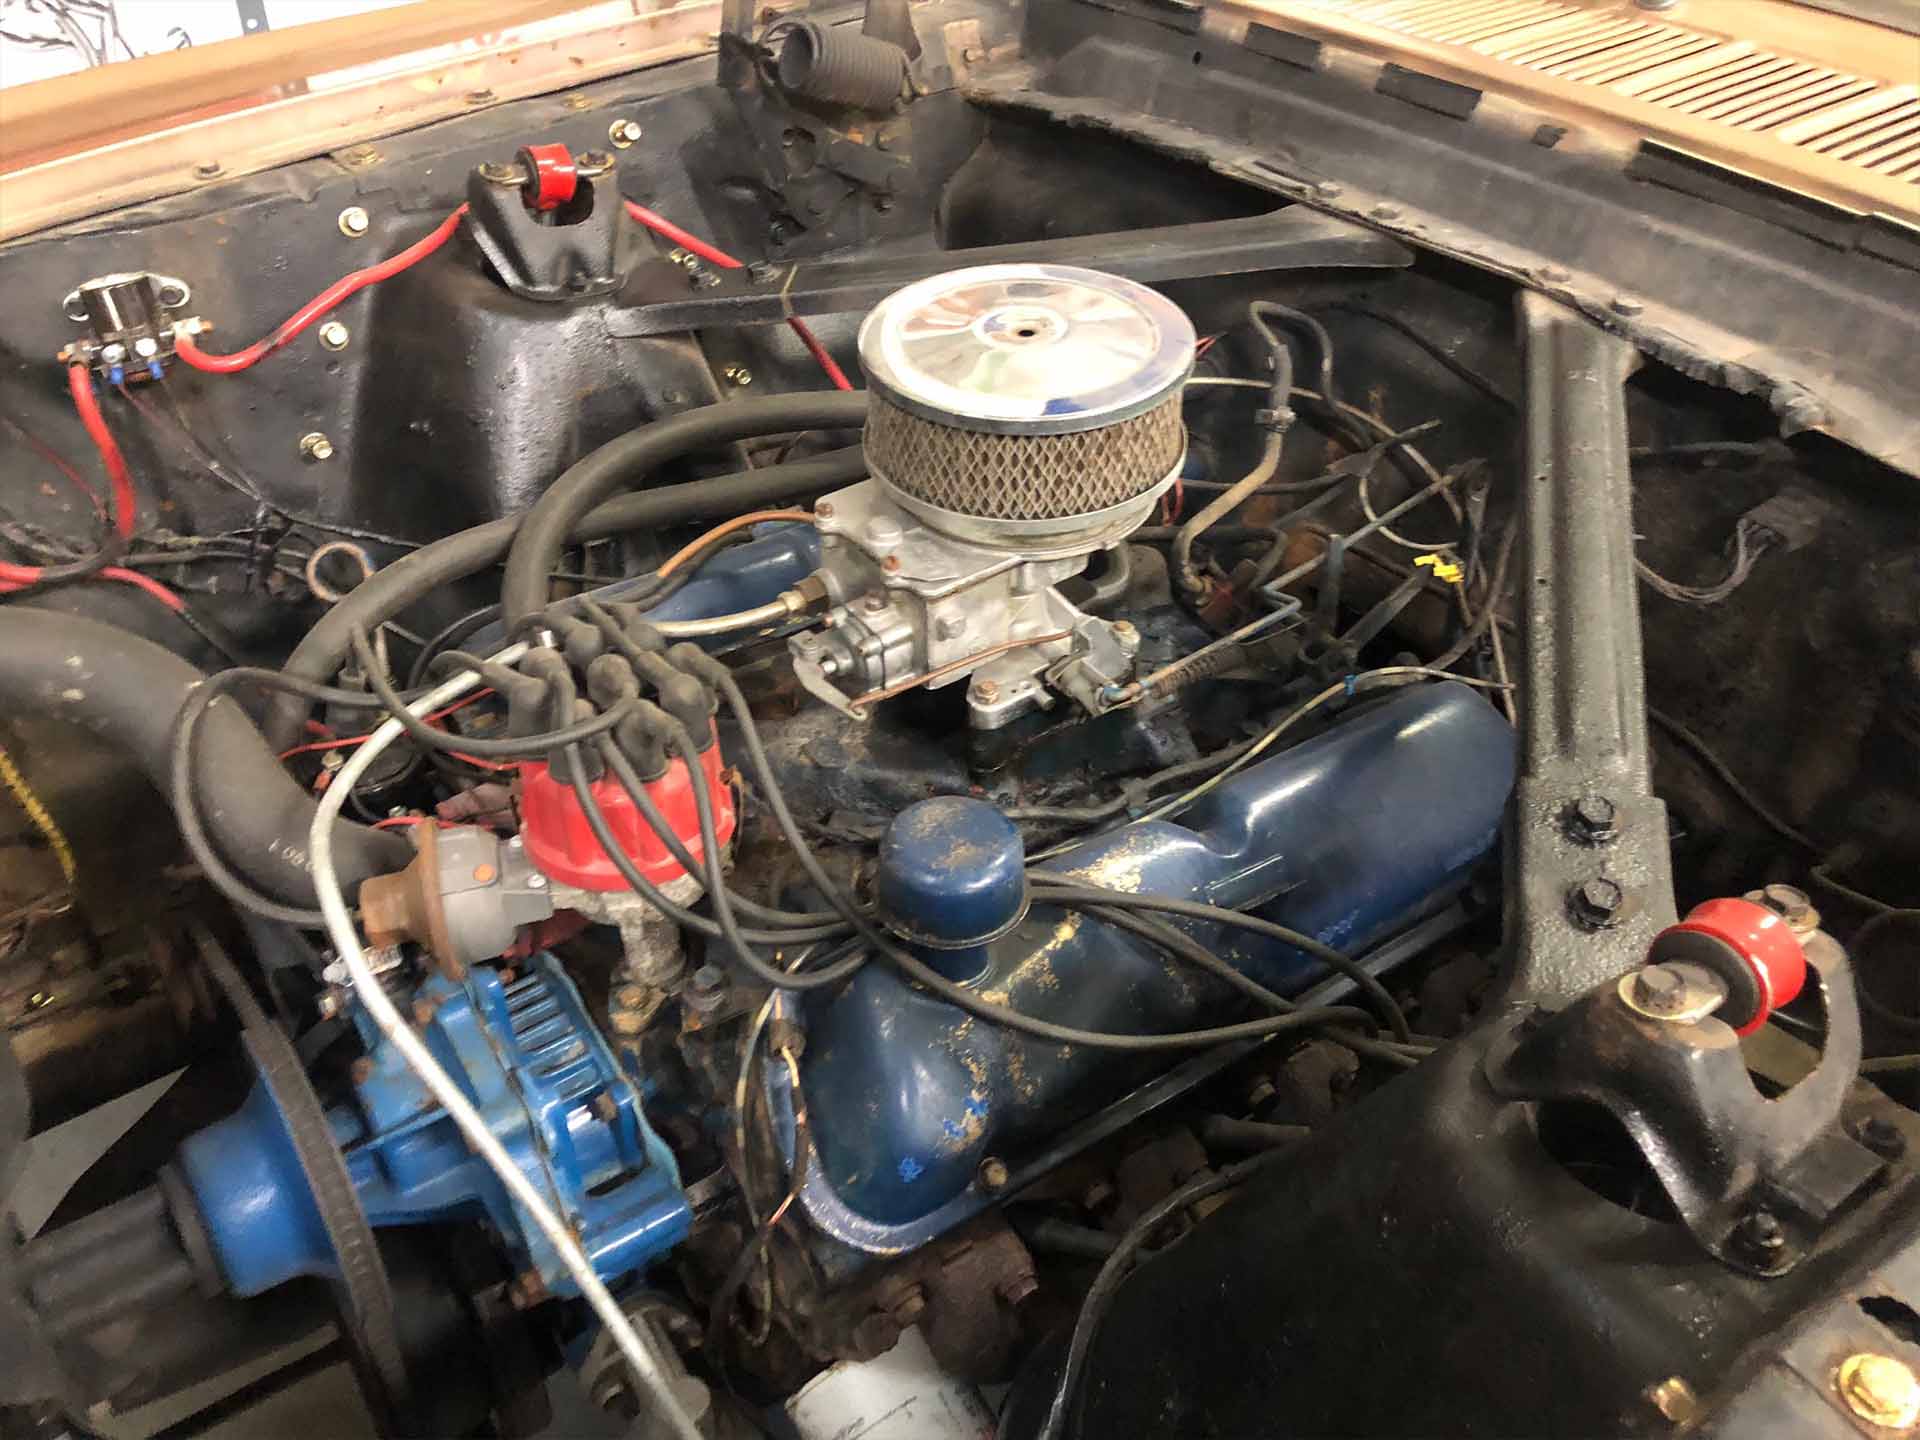 65 Mustang Engine before